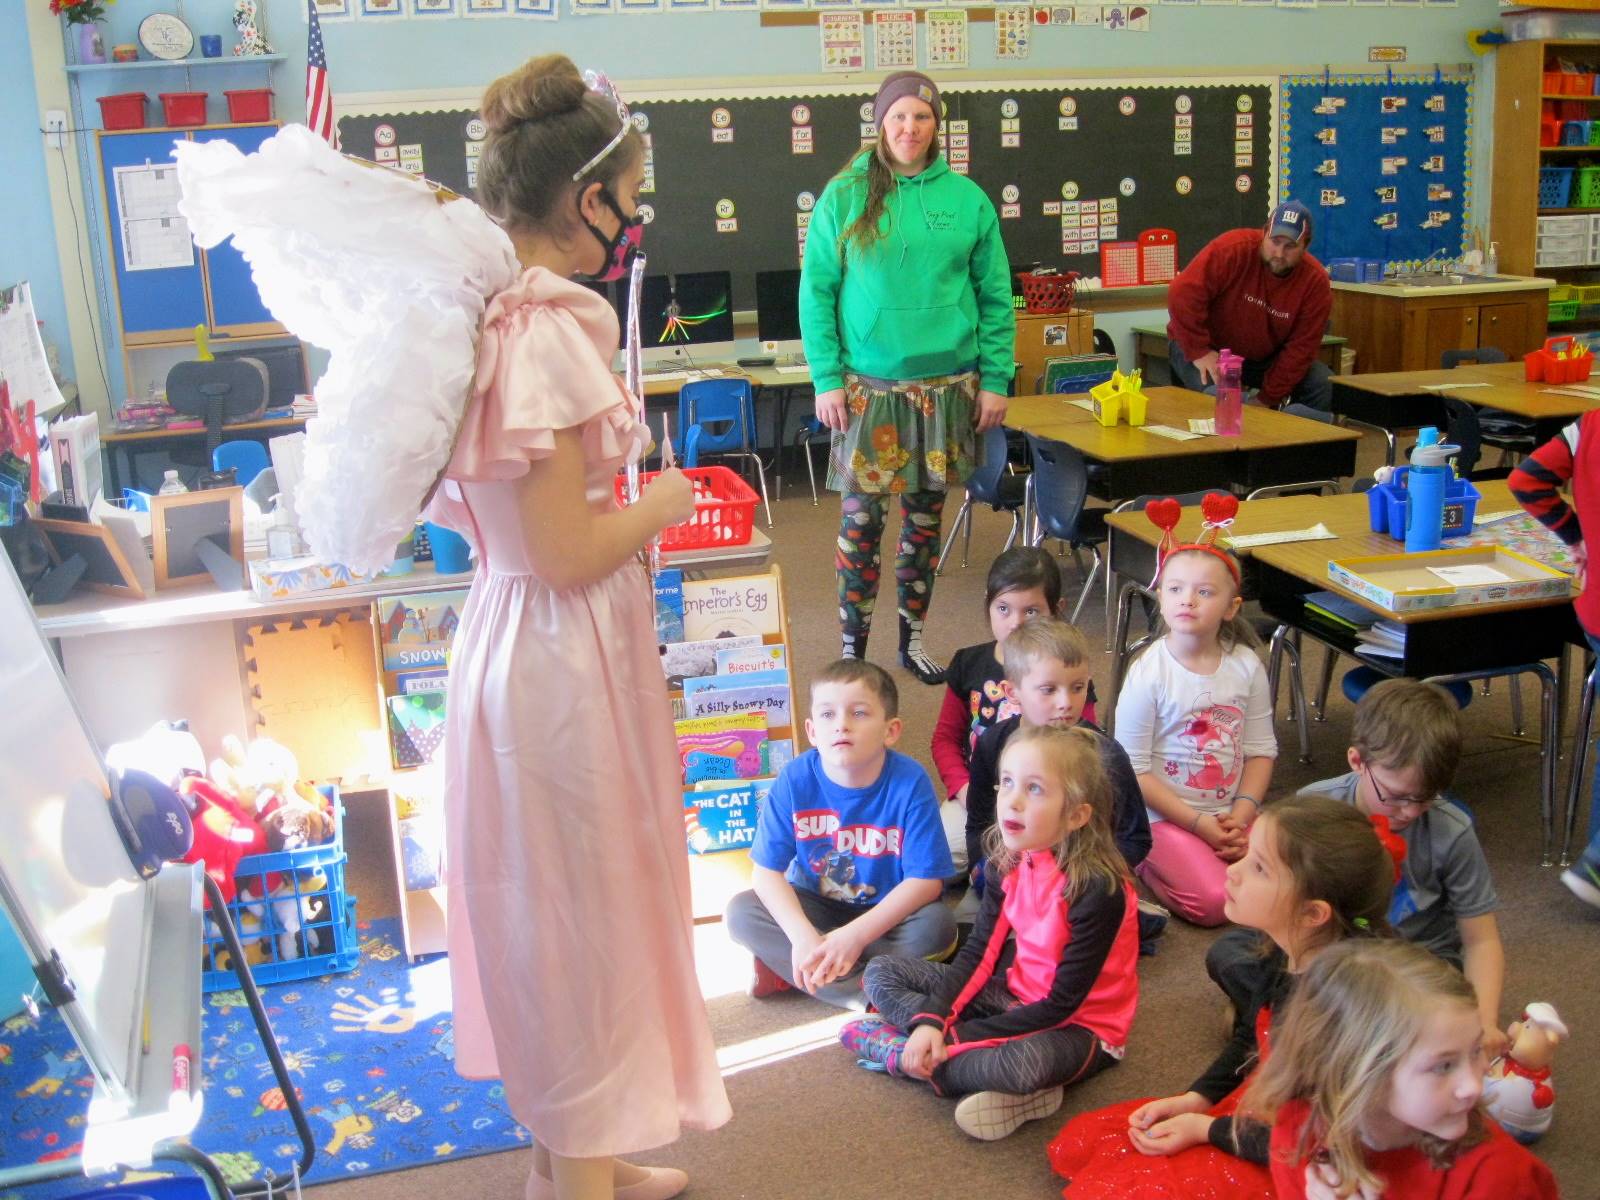 Cupid talks to a group of students about friendship.